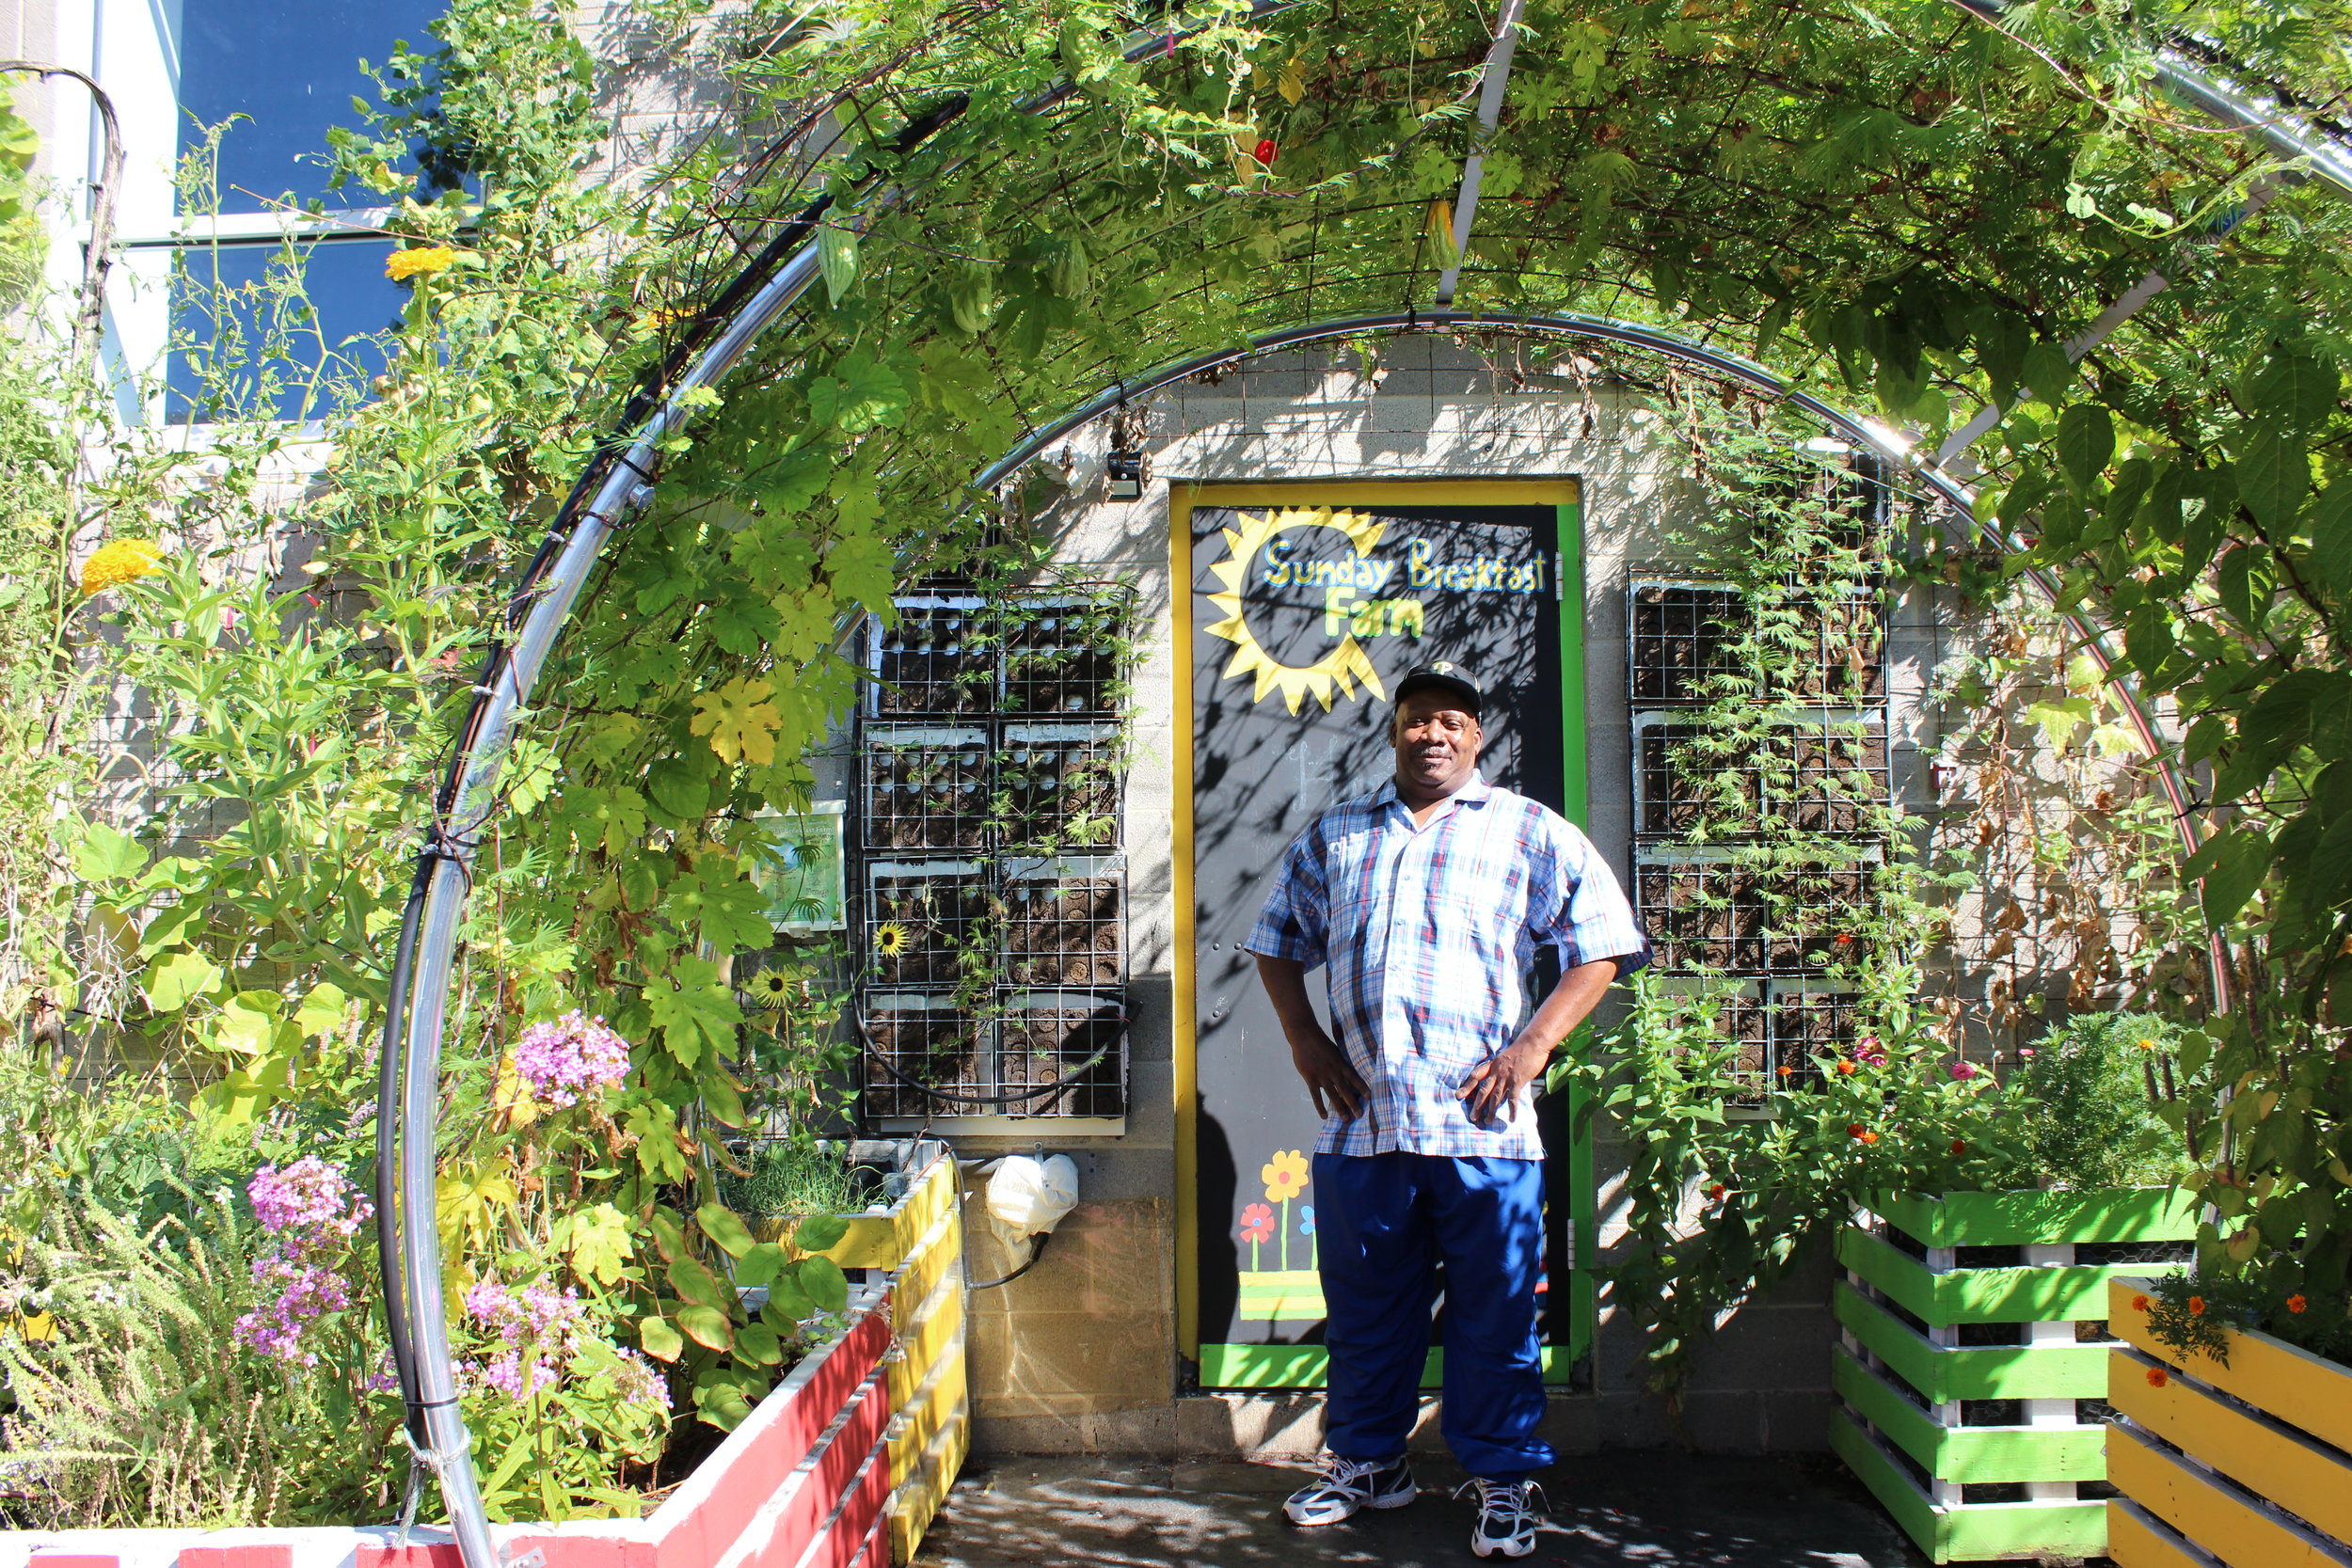 alt text: a sunny wideshot of a black man wearing a baseball hat, checkered button down, and blue jeans stands smiling proudly at the camera. An archway of lush flowers and leaves arches over him.